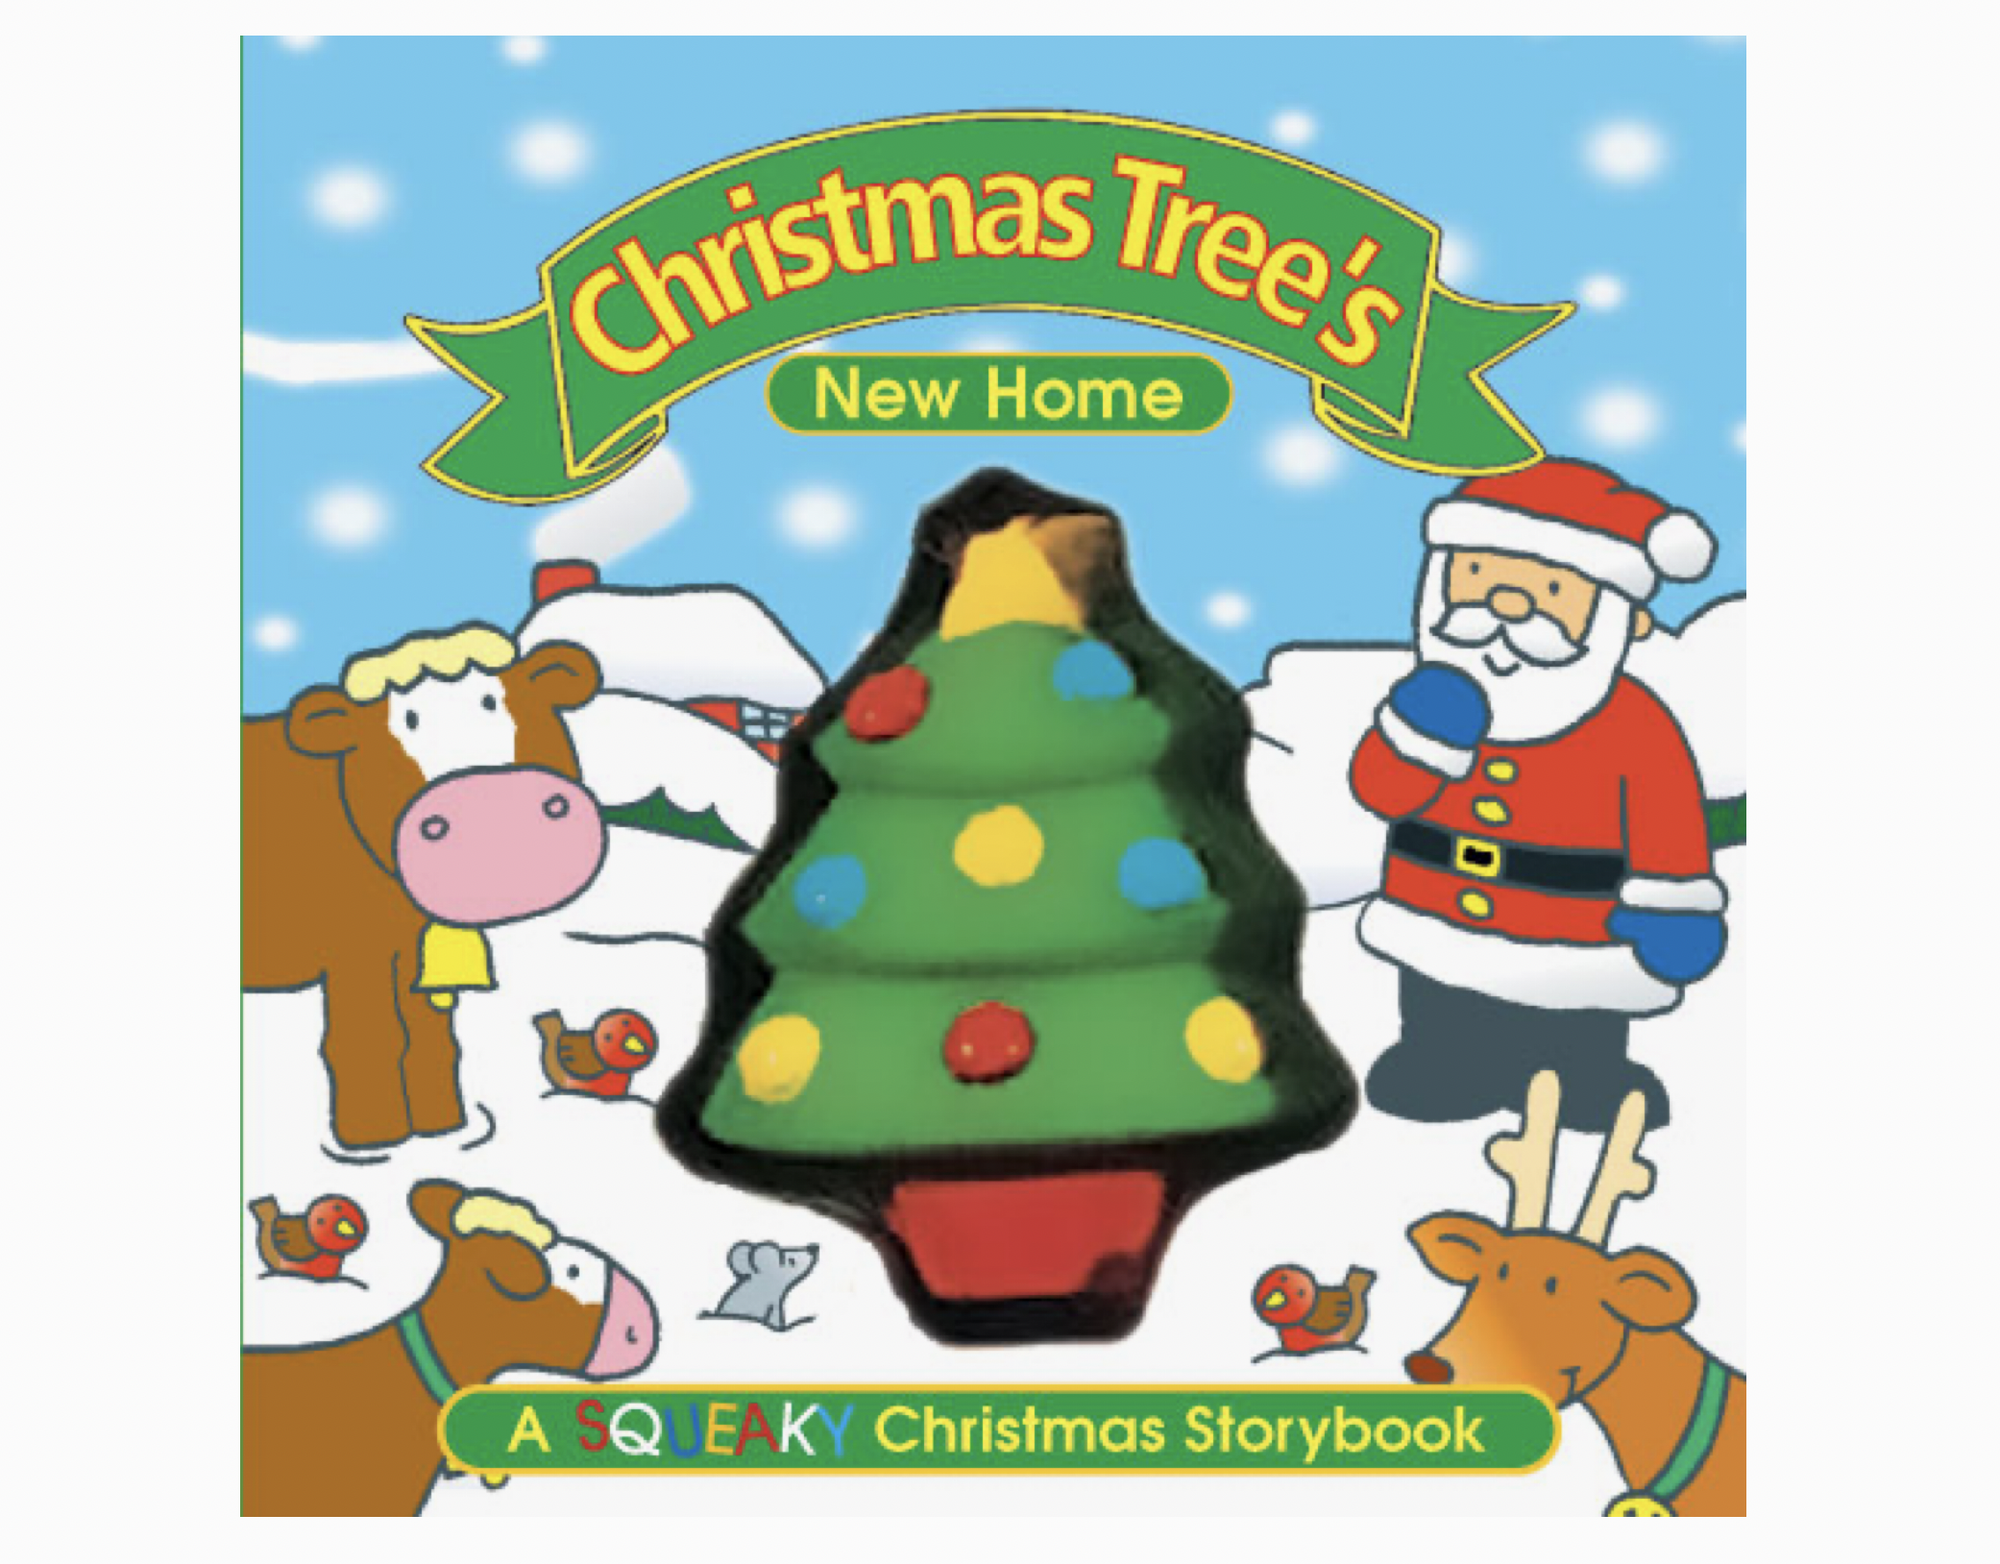 A Squeaky Christmas Story Book-New Home